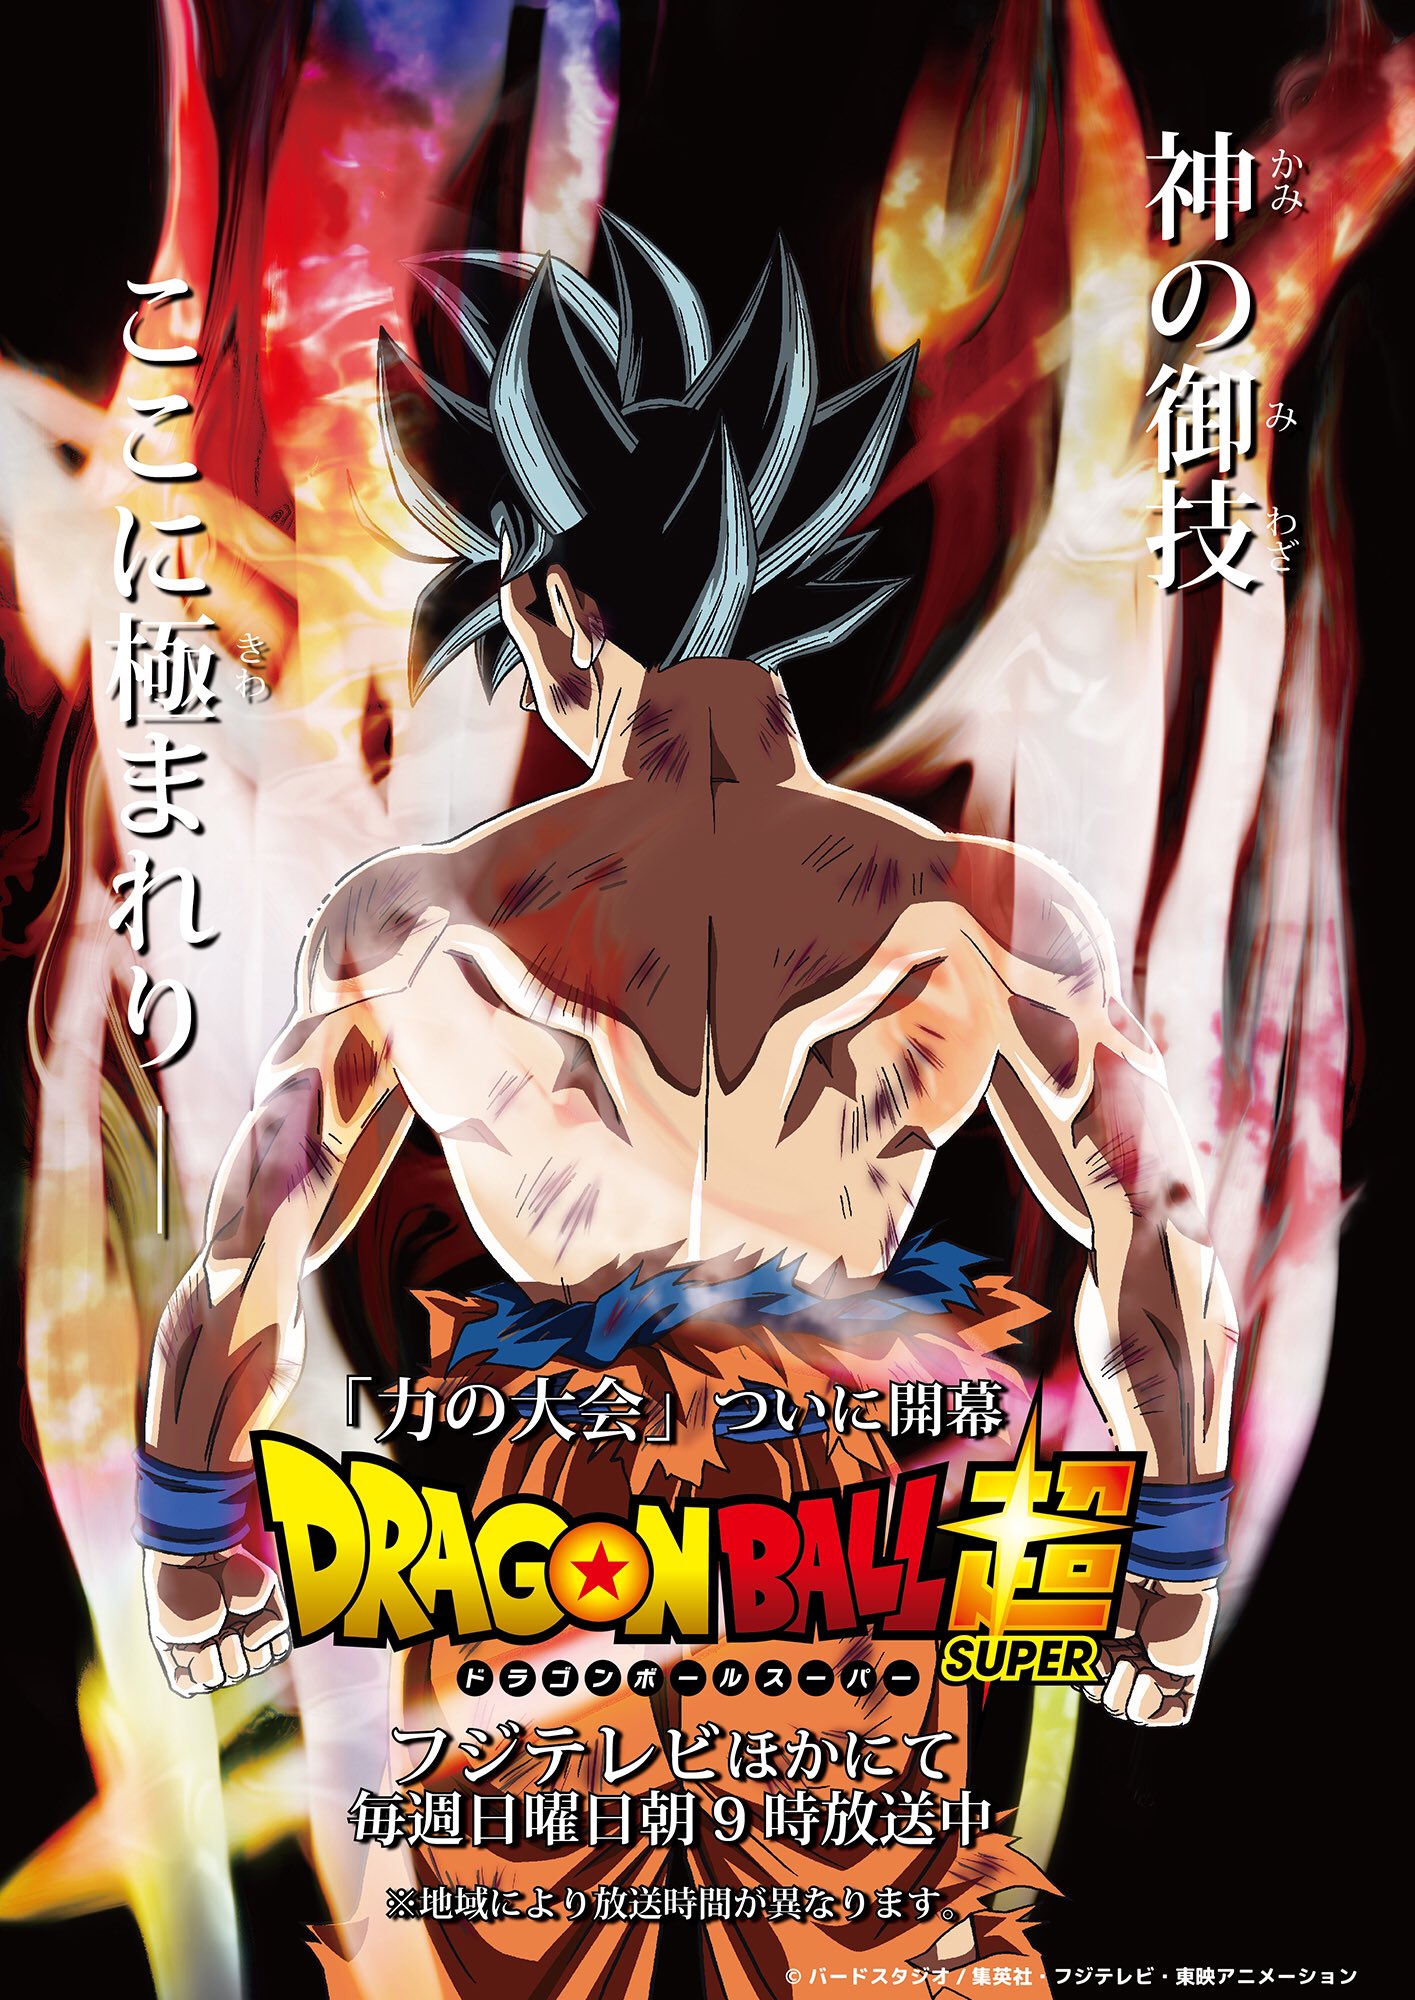 Goku New Form Wallpaper For iPhone 1415x2000